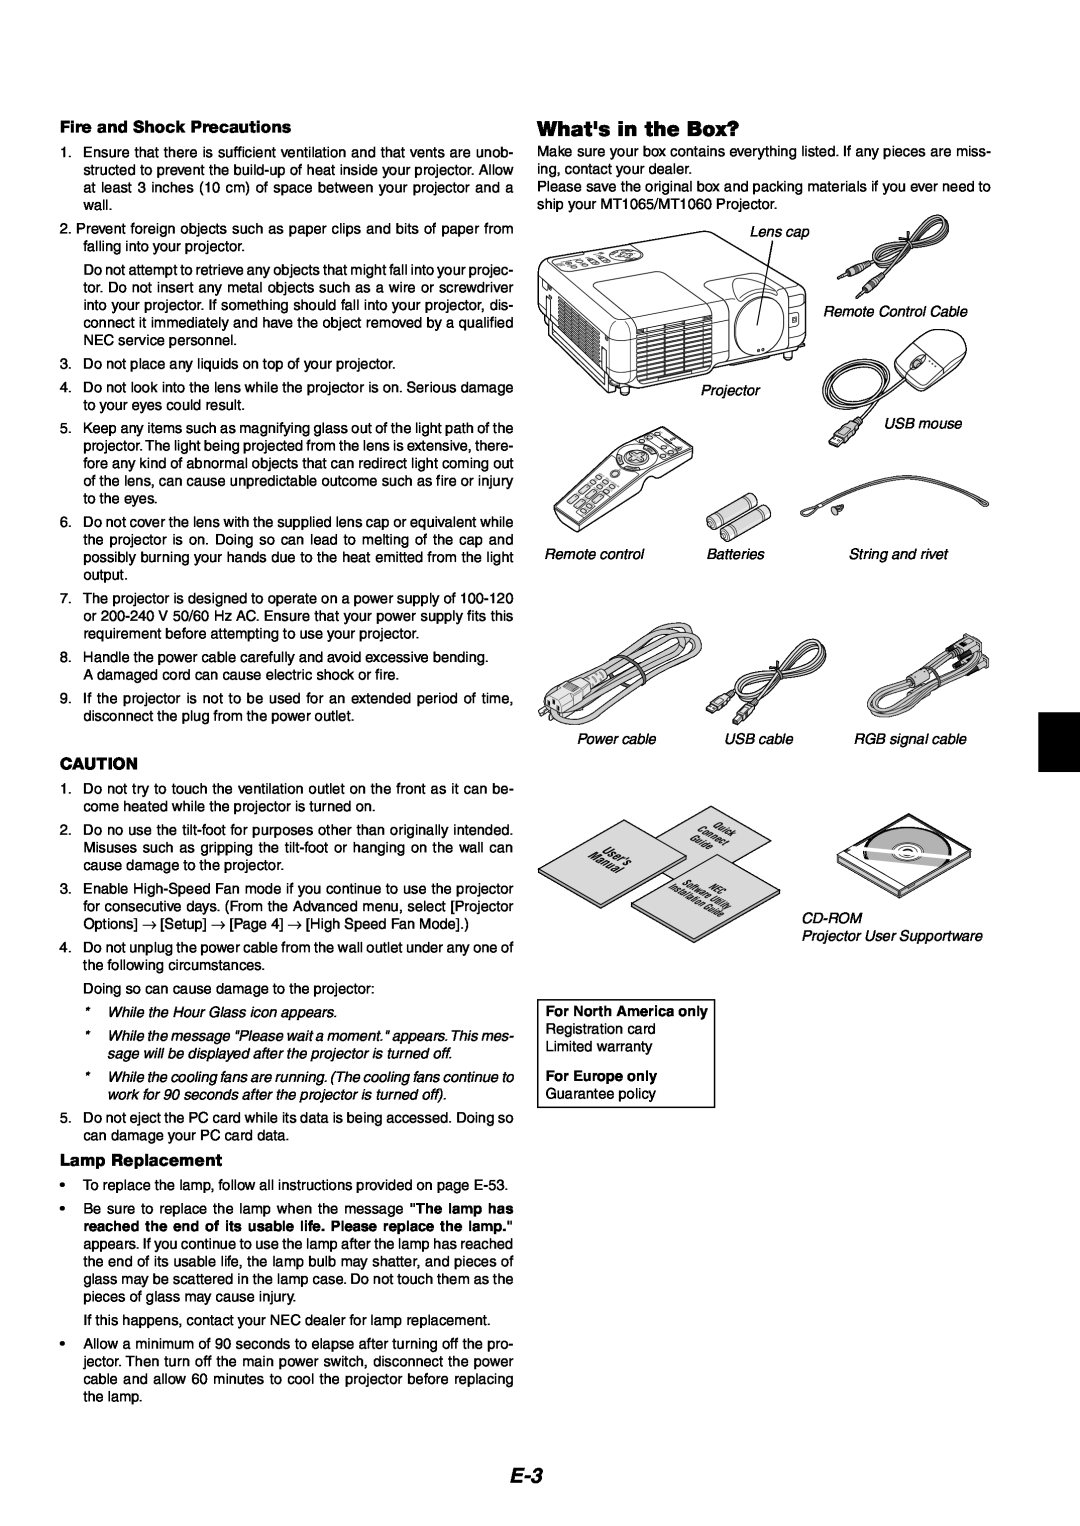 NEC MT1065/MT1060 user manual Whats in the Box?, Fire and Shock Precautions, Lamp Replacement, For Europe only 